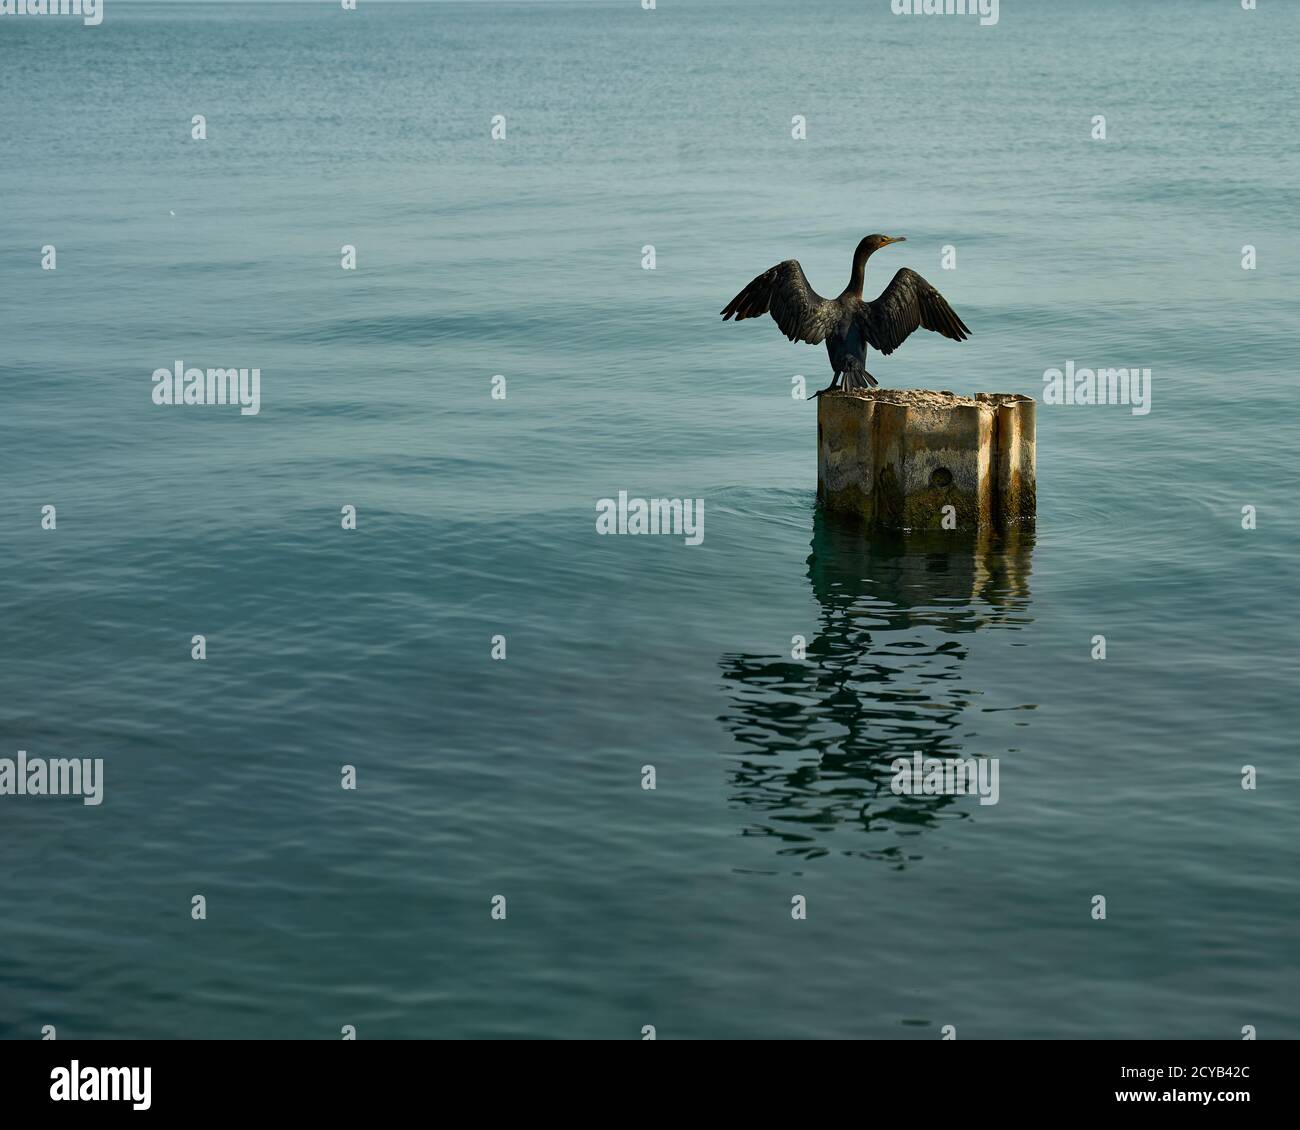 Tranquil scene, cormorant perched on pillar in the water spreading wings Stock Photo